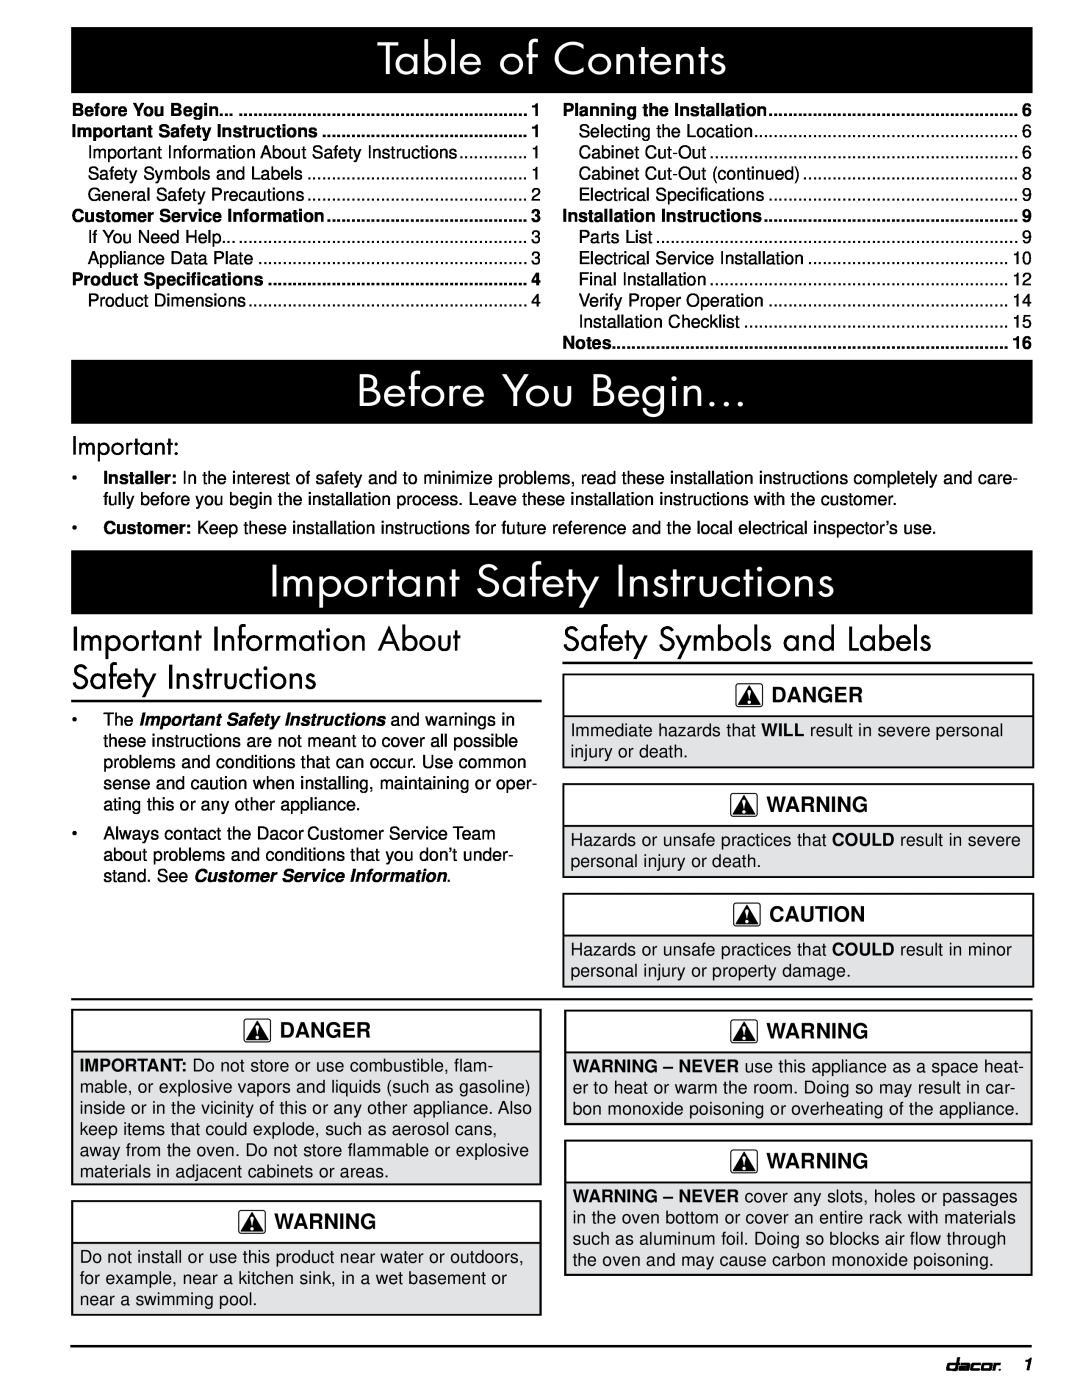 Dacor MOH230, MOV230 Table of Contents, Before You Begin, Important Safety Instructions, Safety Symbols and Labels, Danger 